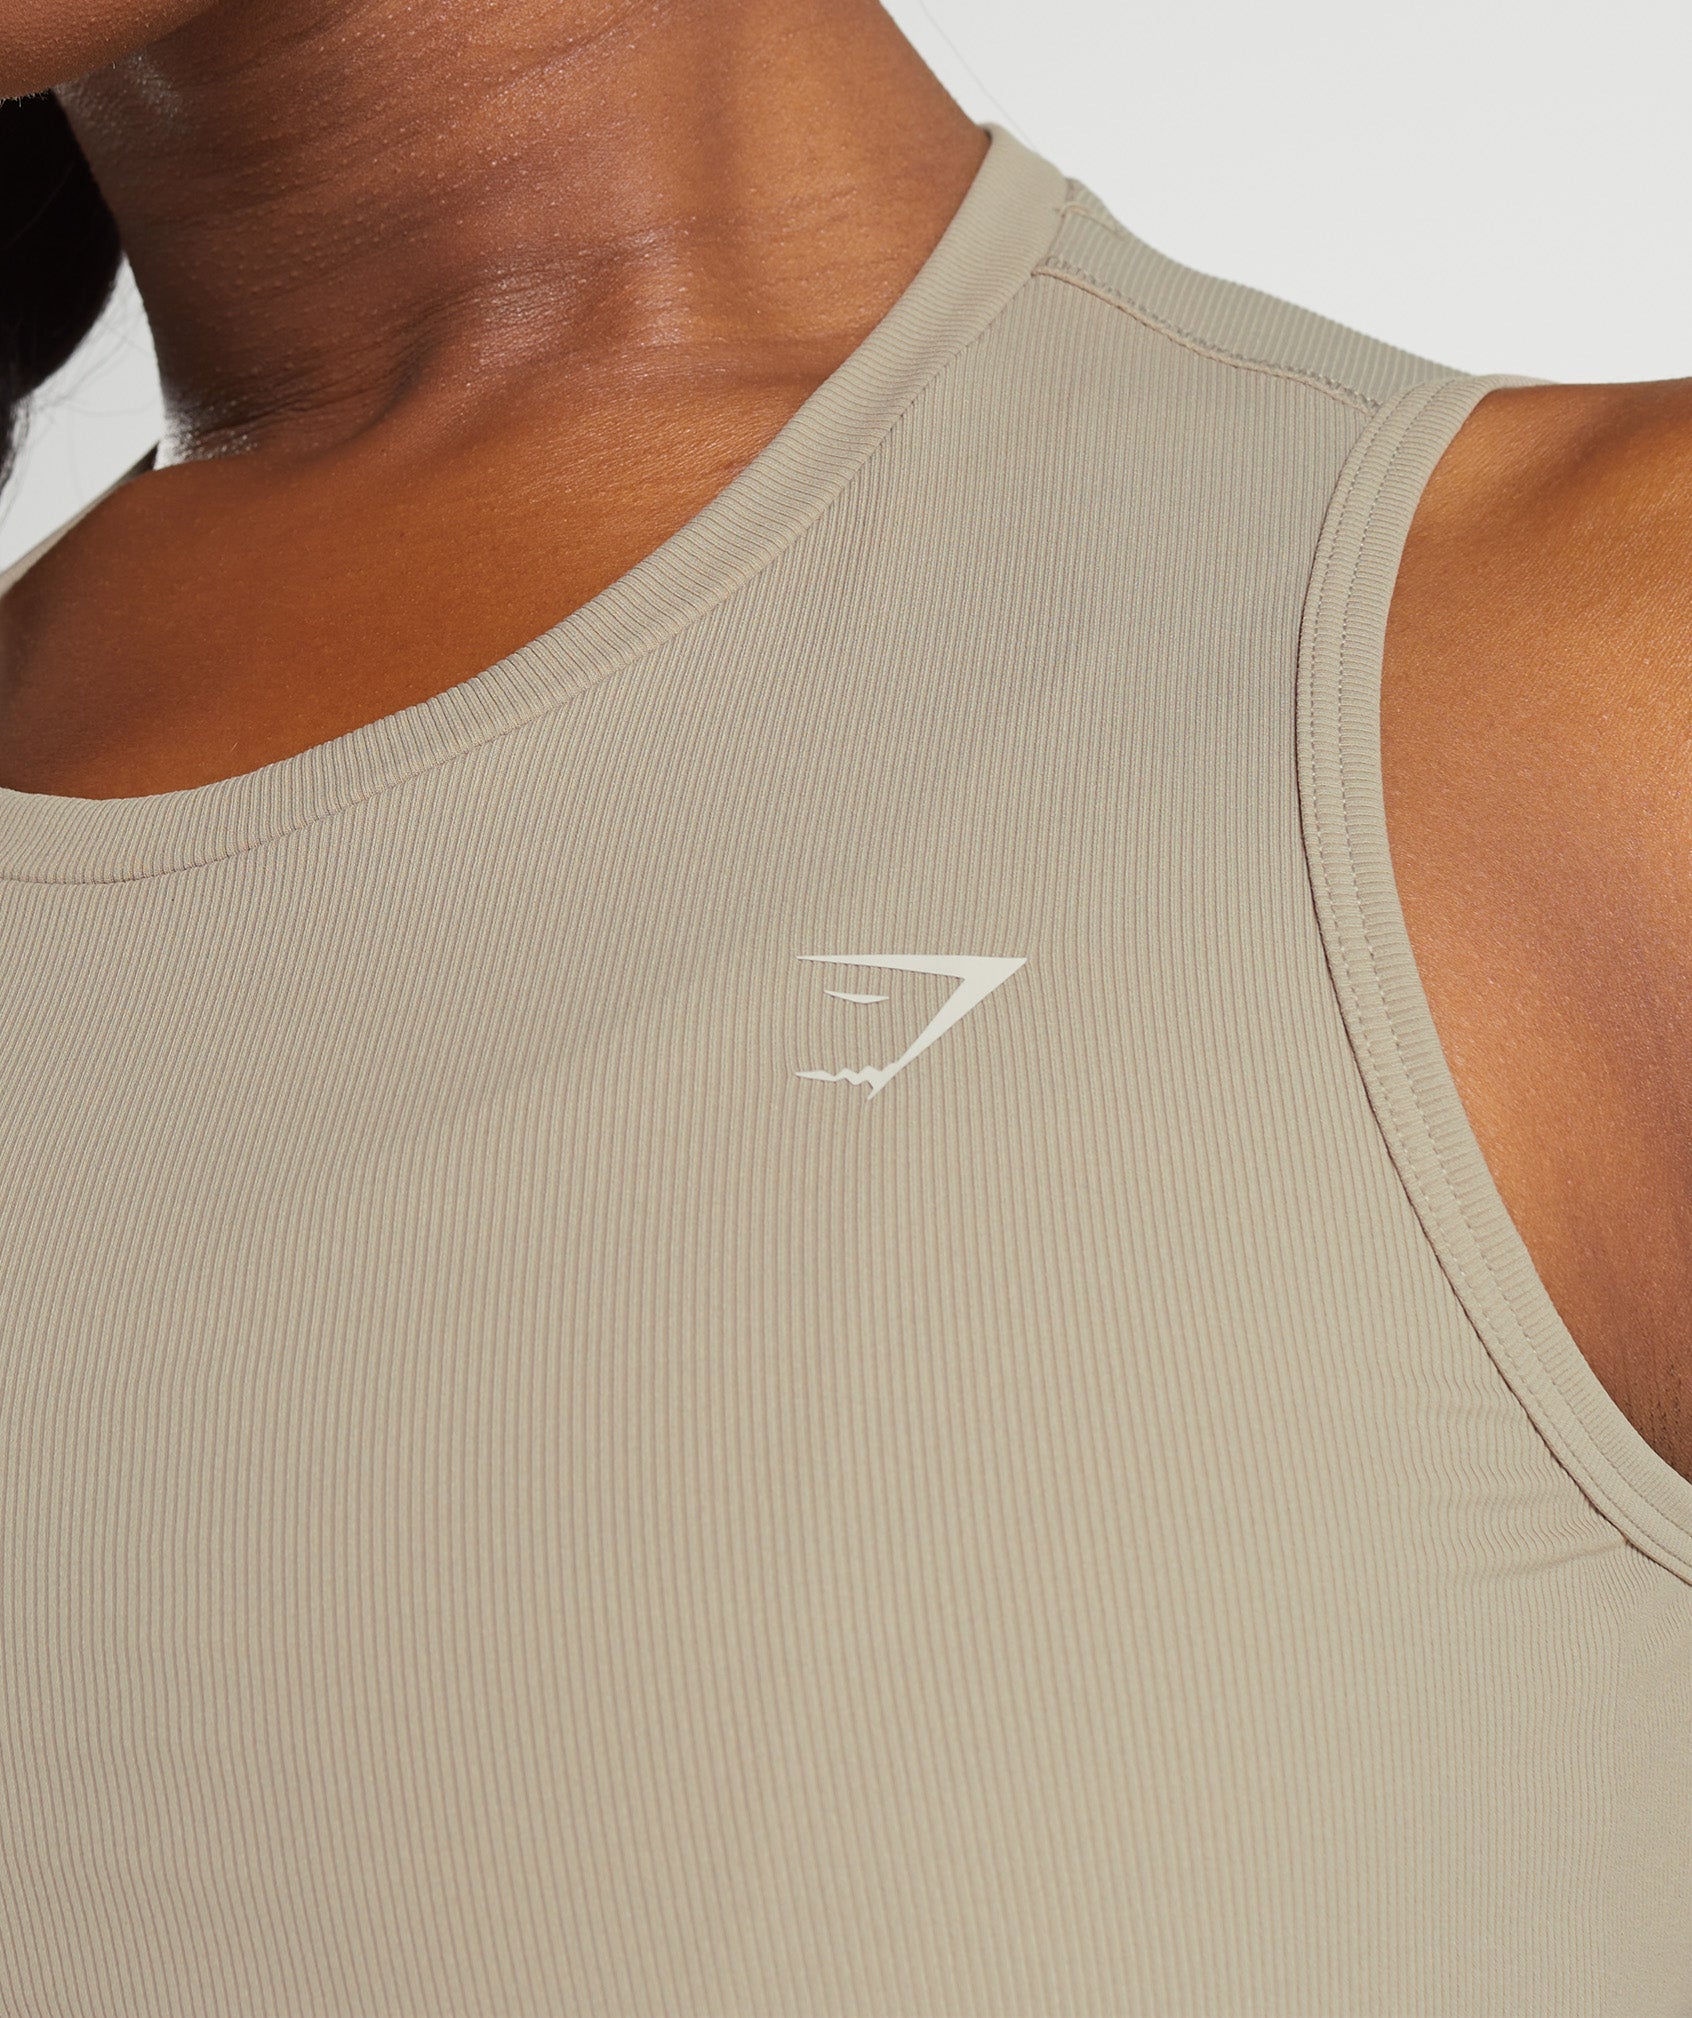 Elevate Asymmetric Tank in Cement Brown - view 6